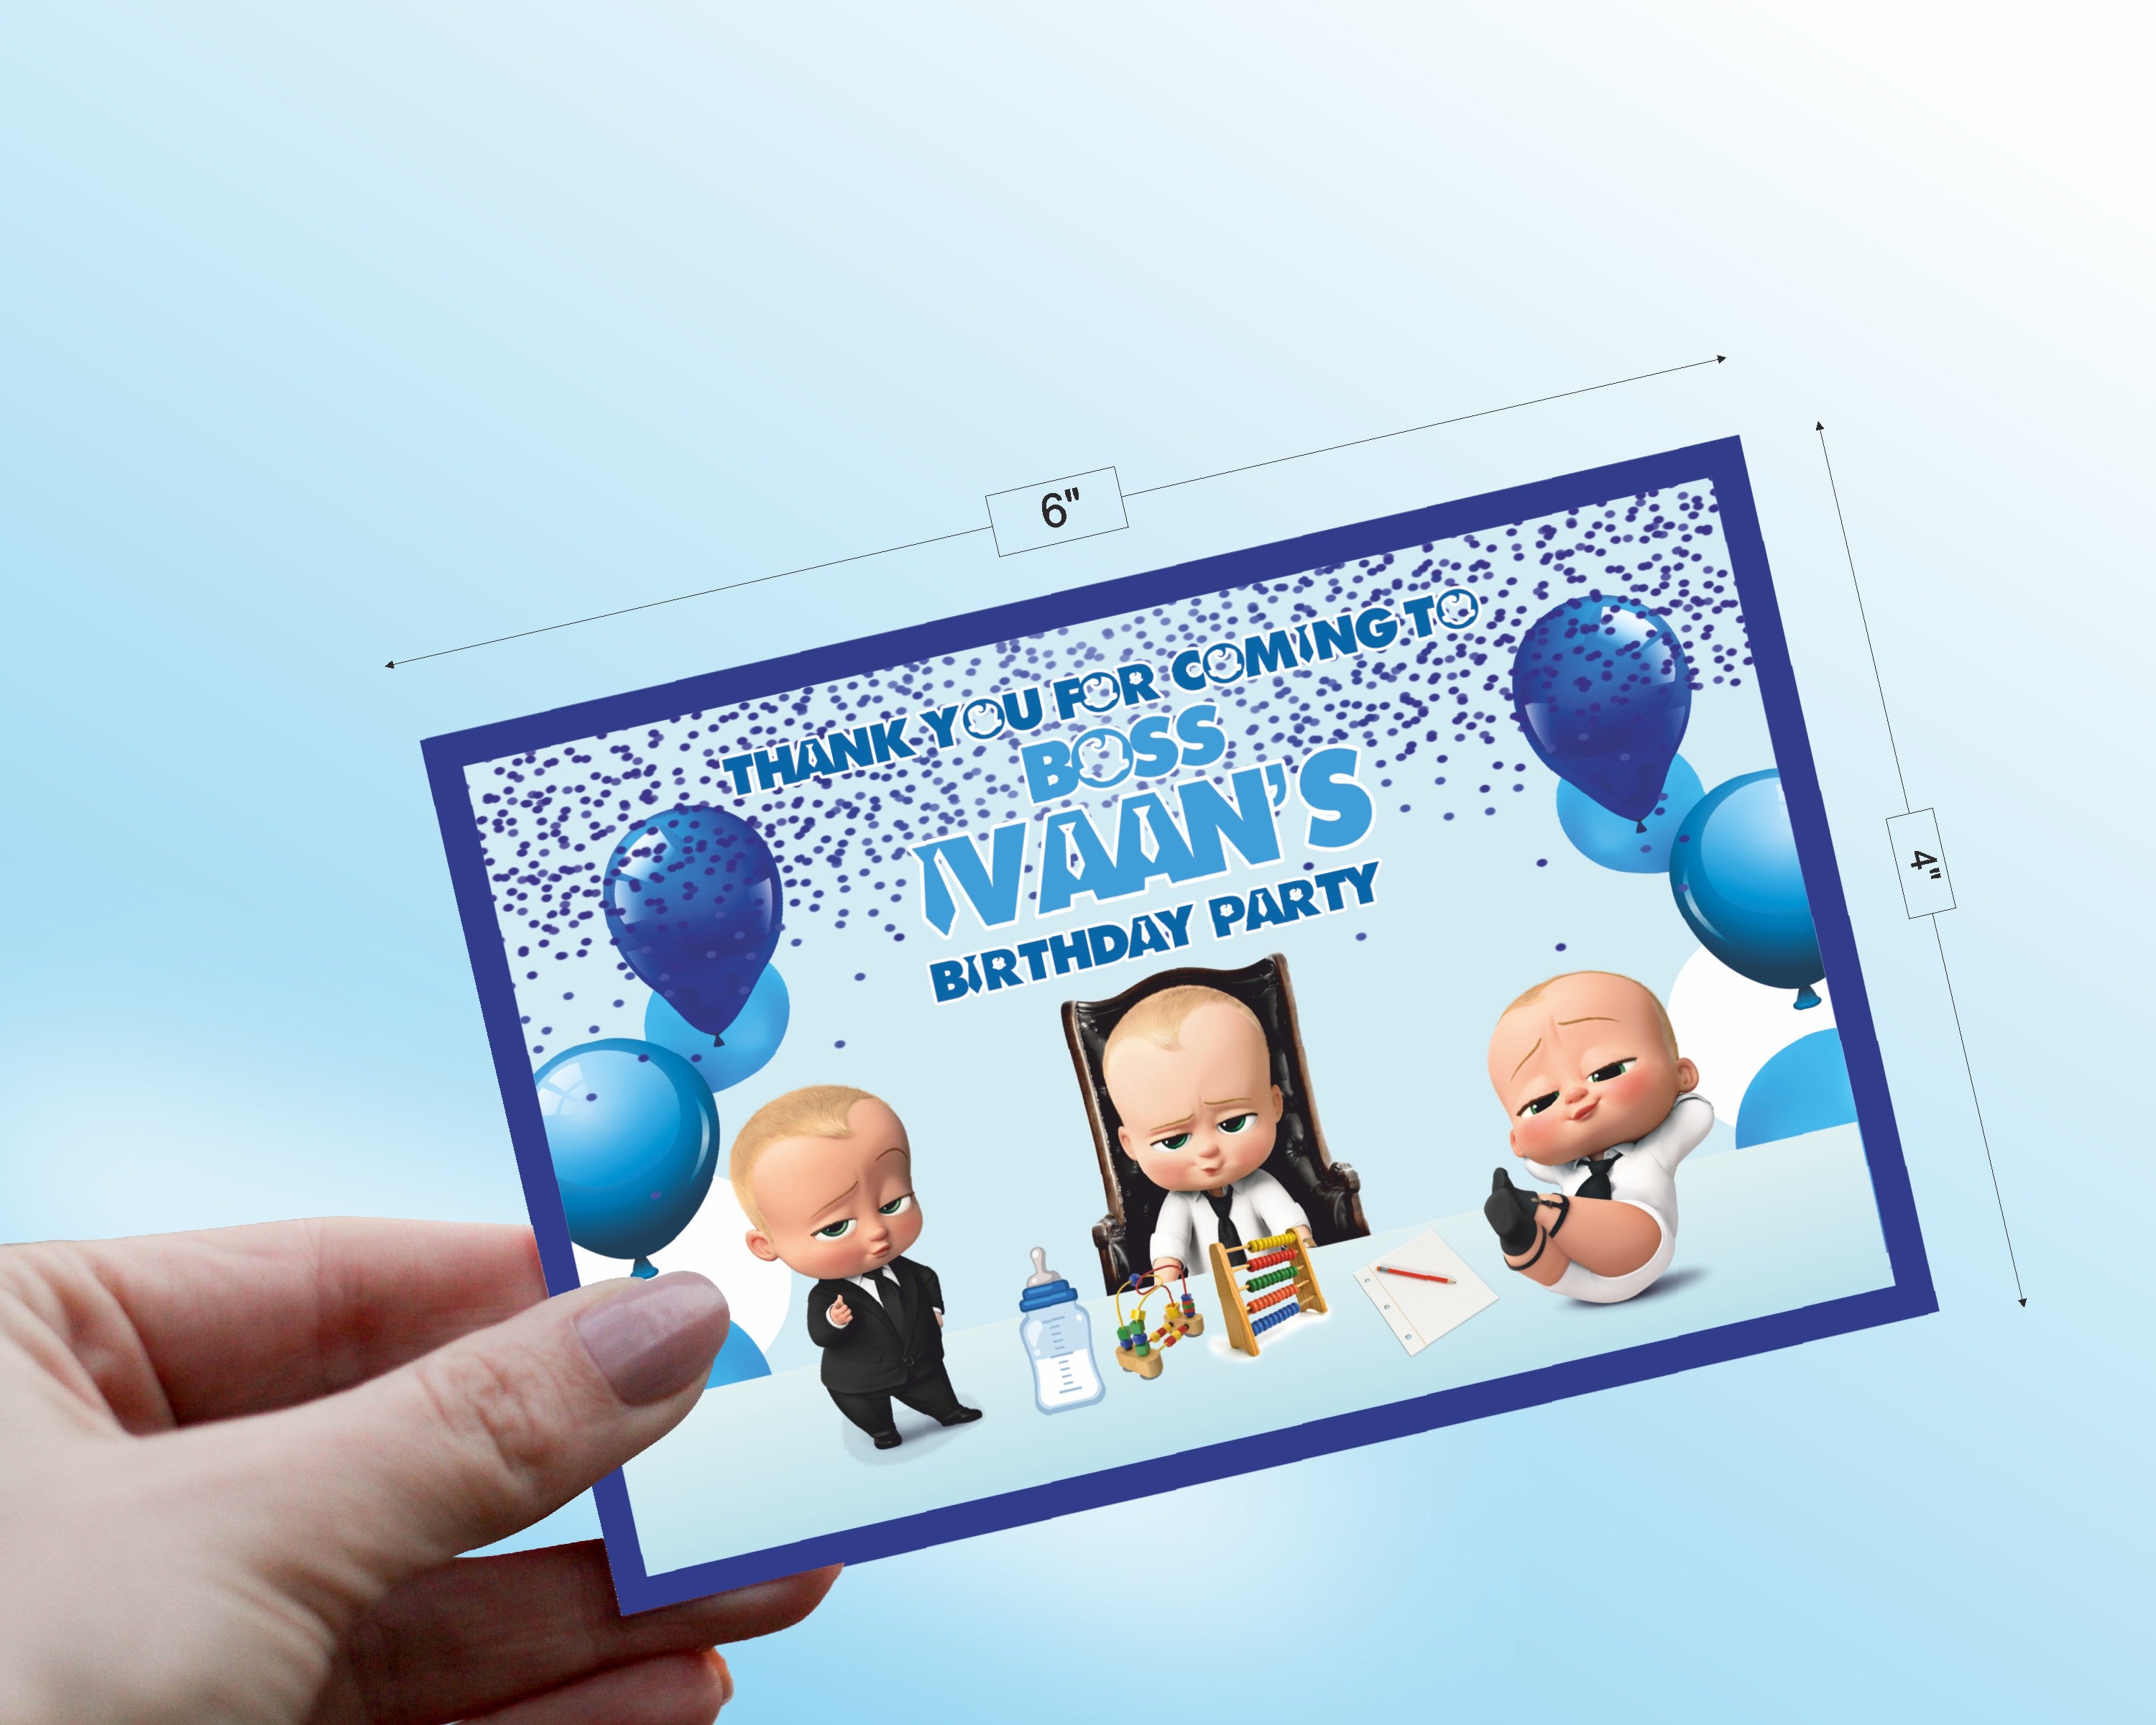 PSI Boss Baby Theme Thank You Card